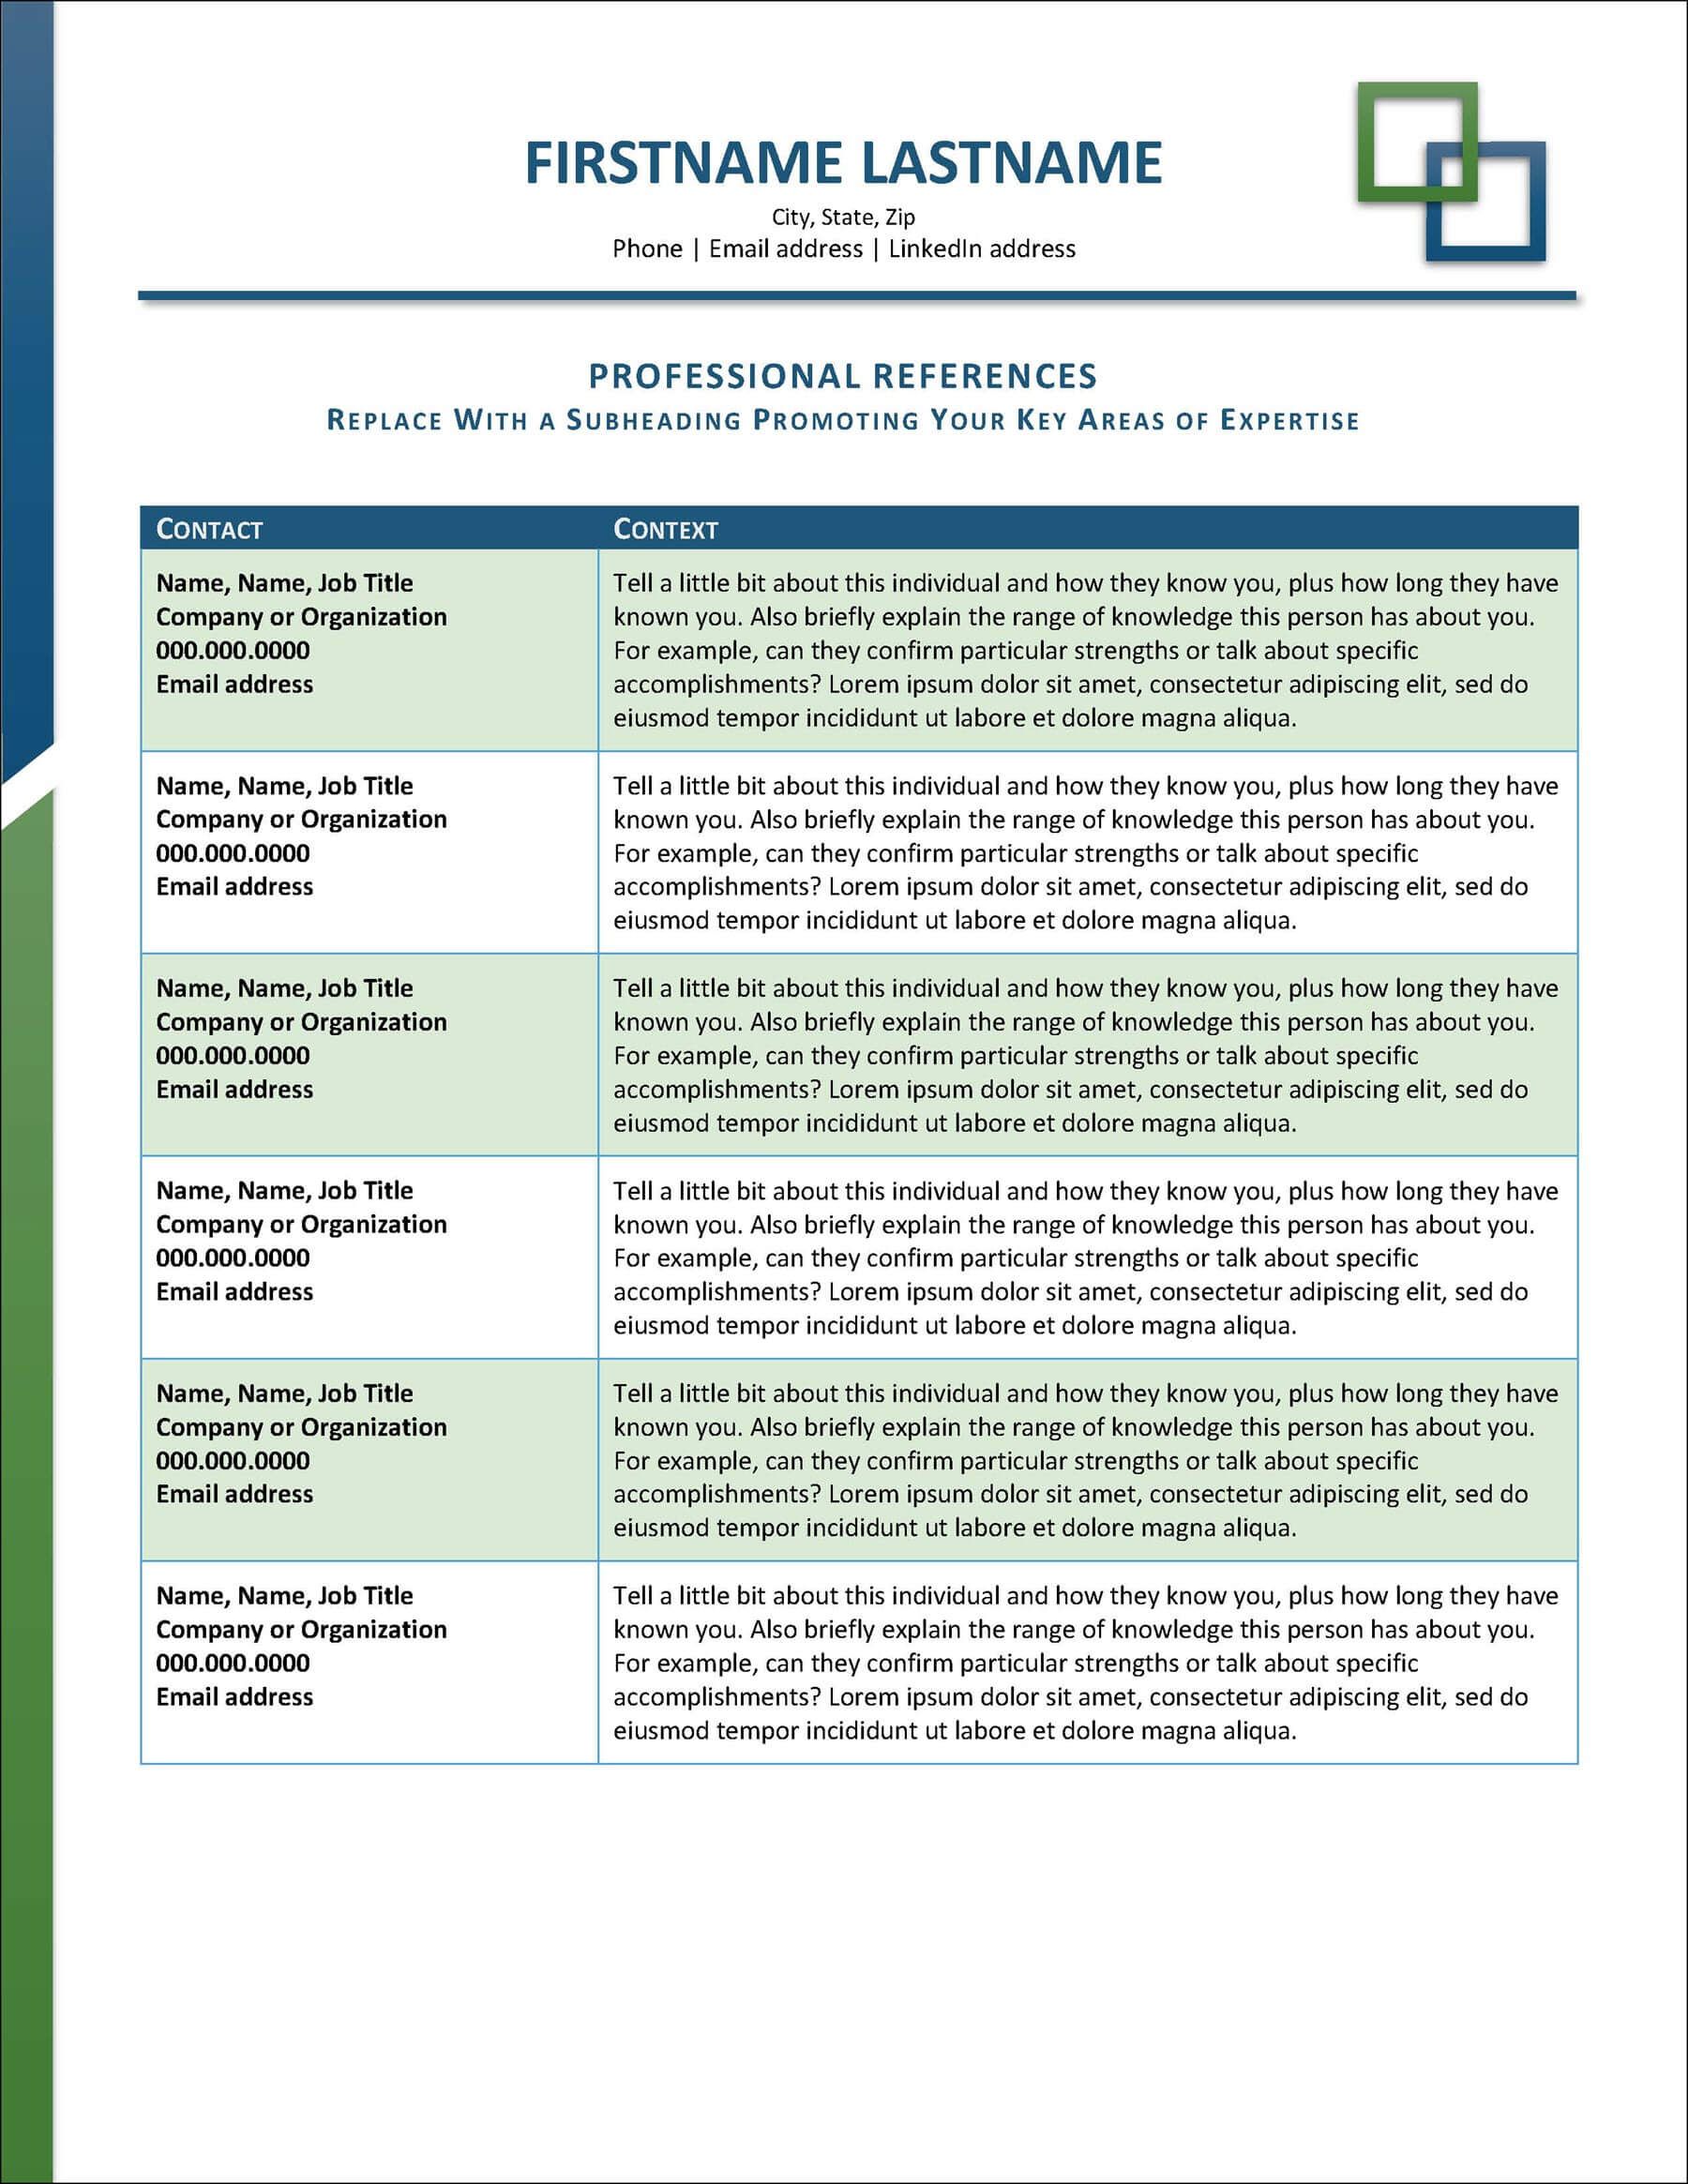 Professional References Sheet